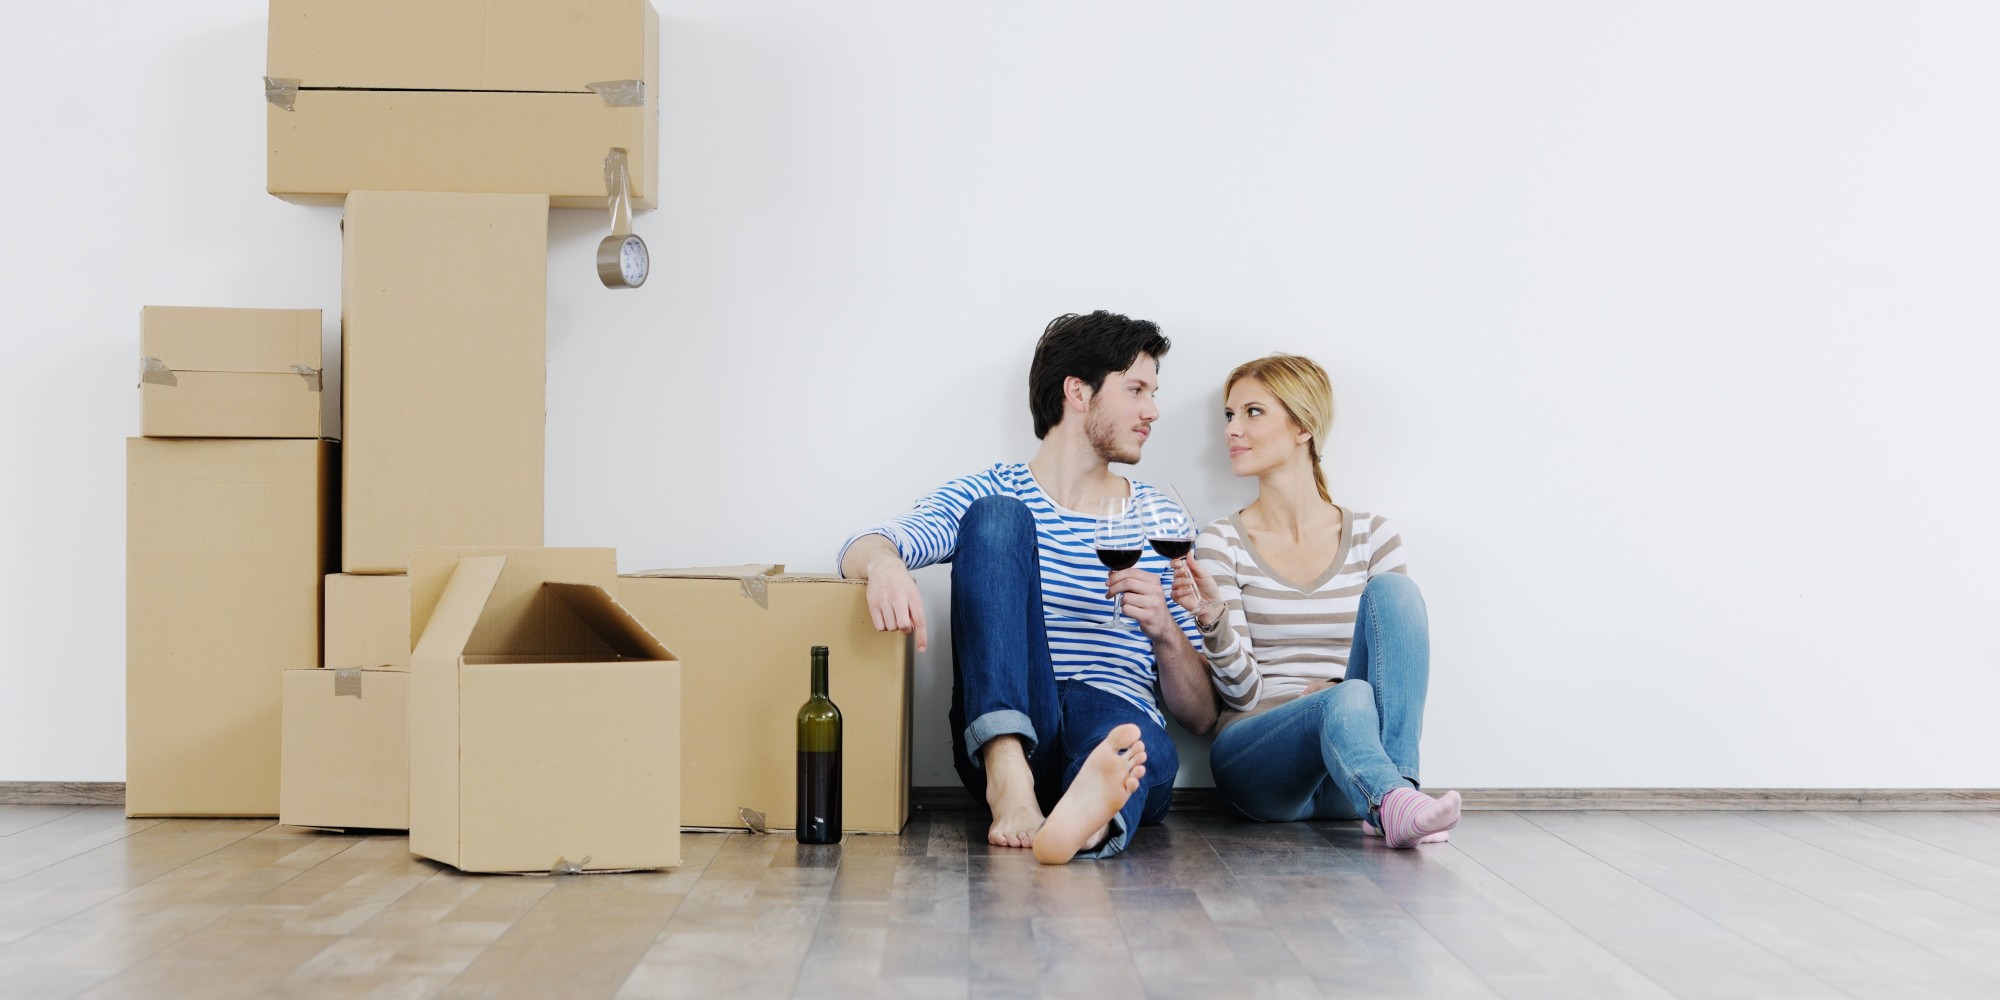 cohabitation-5-questions-to-ask-before-moving-in-together-huffpost